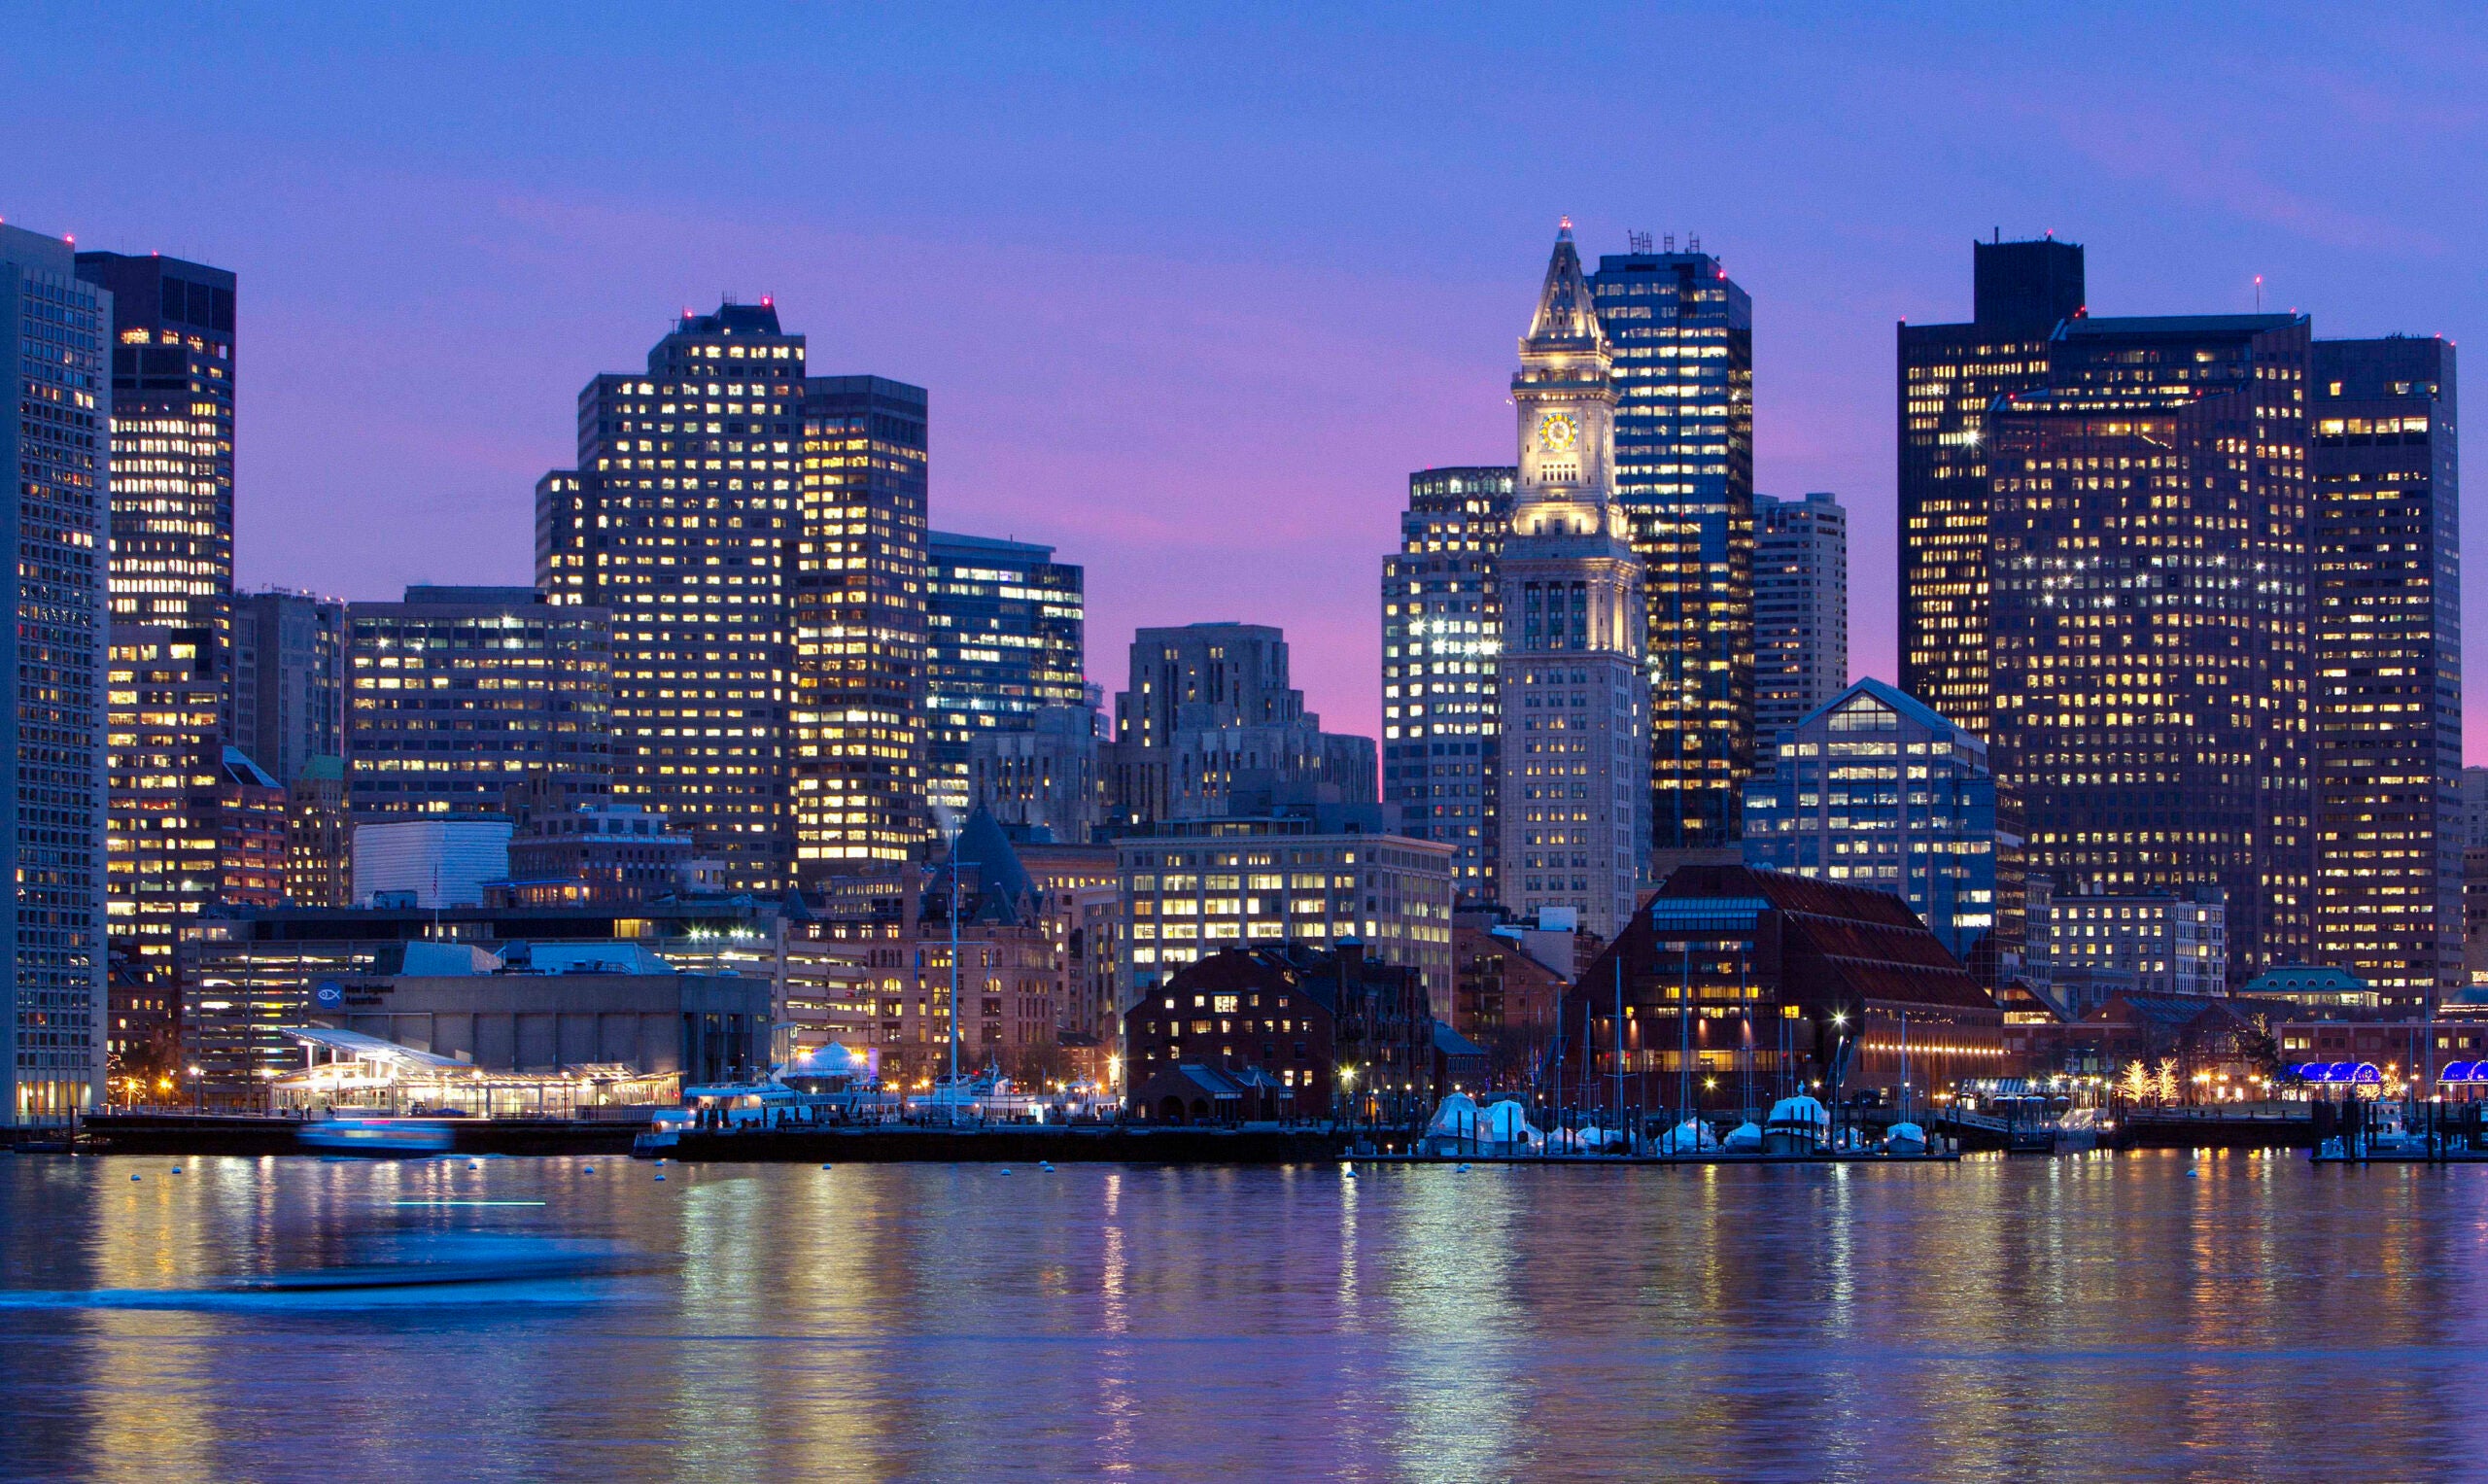 The Boston skyline is illuminated and reflected in the waters of Boston Harbor.